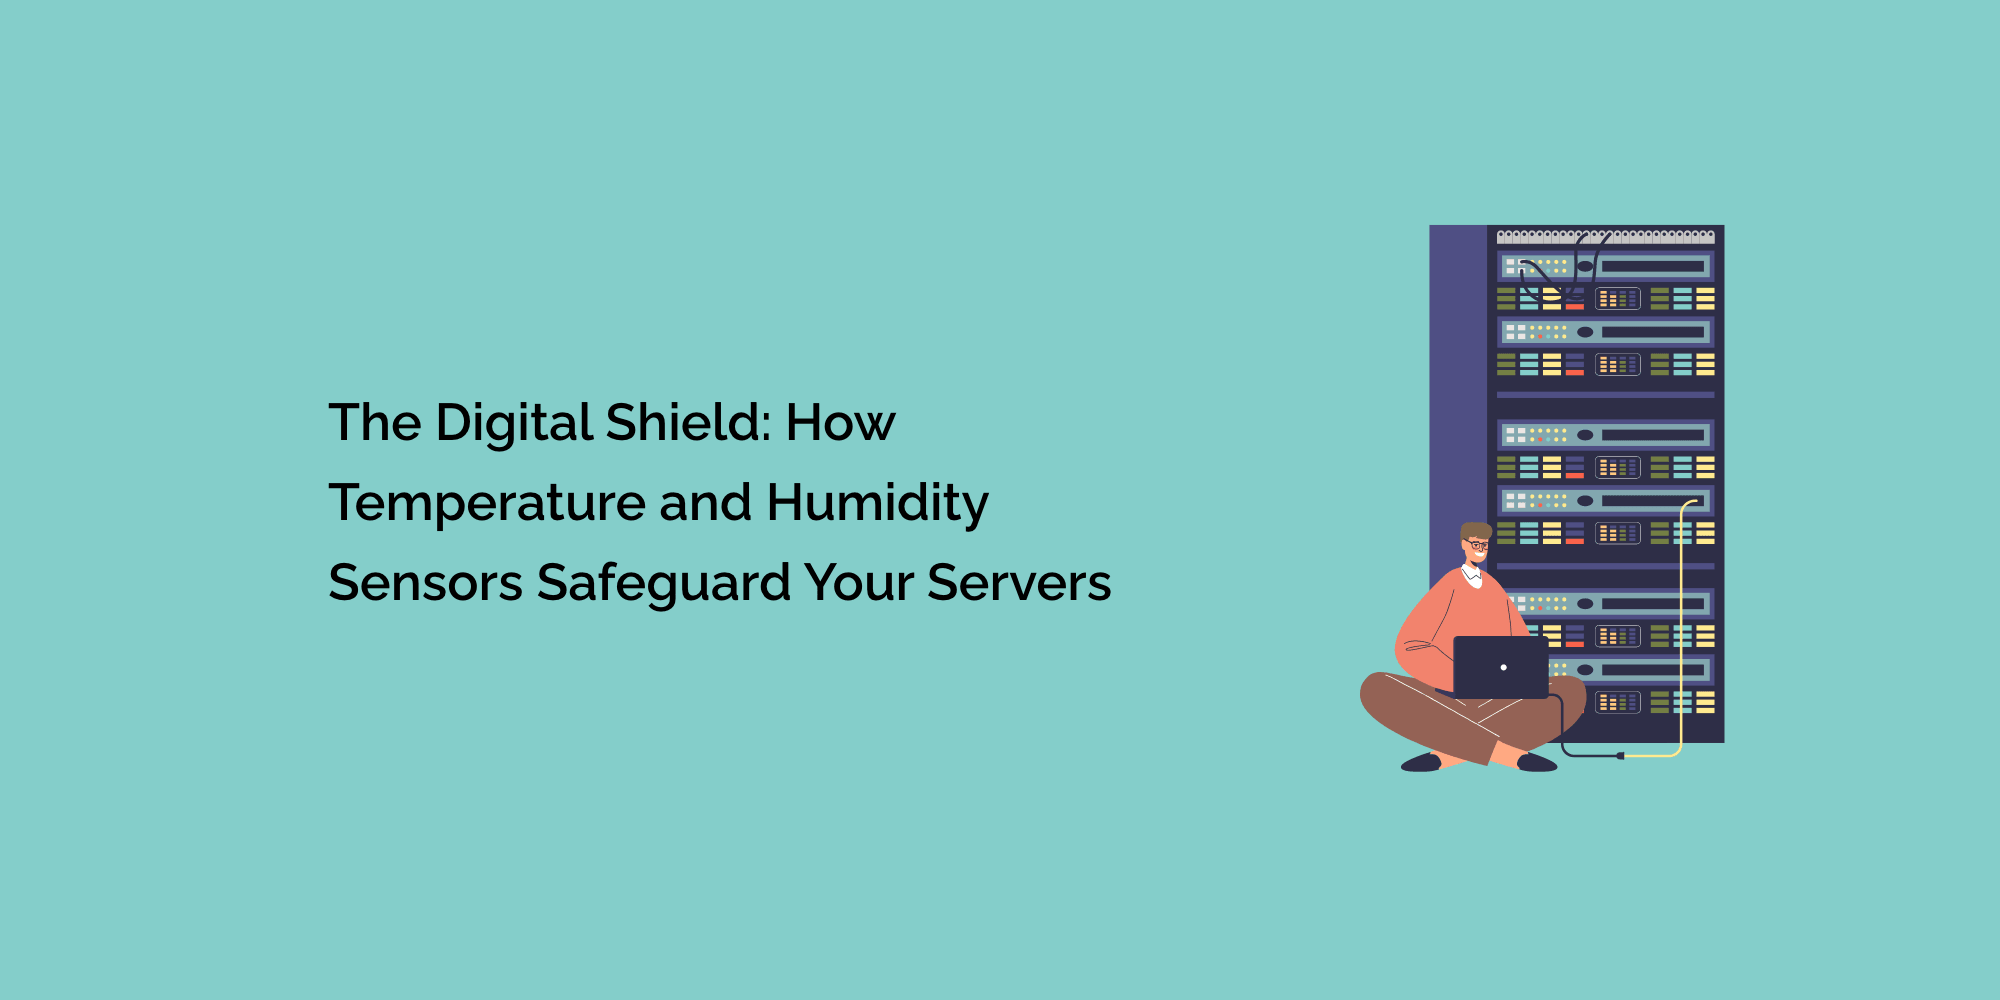 The Digital Shield: How Temperature and Humidity Sensors Safeguard Your Servers